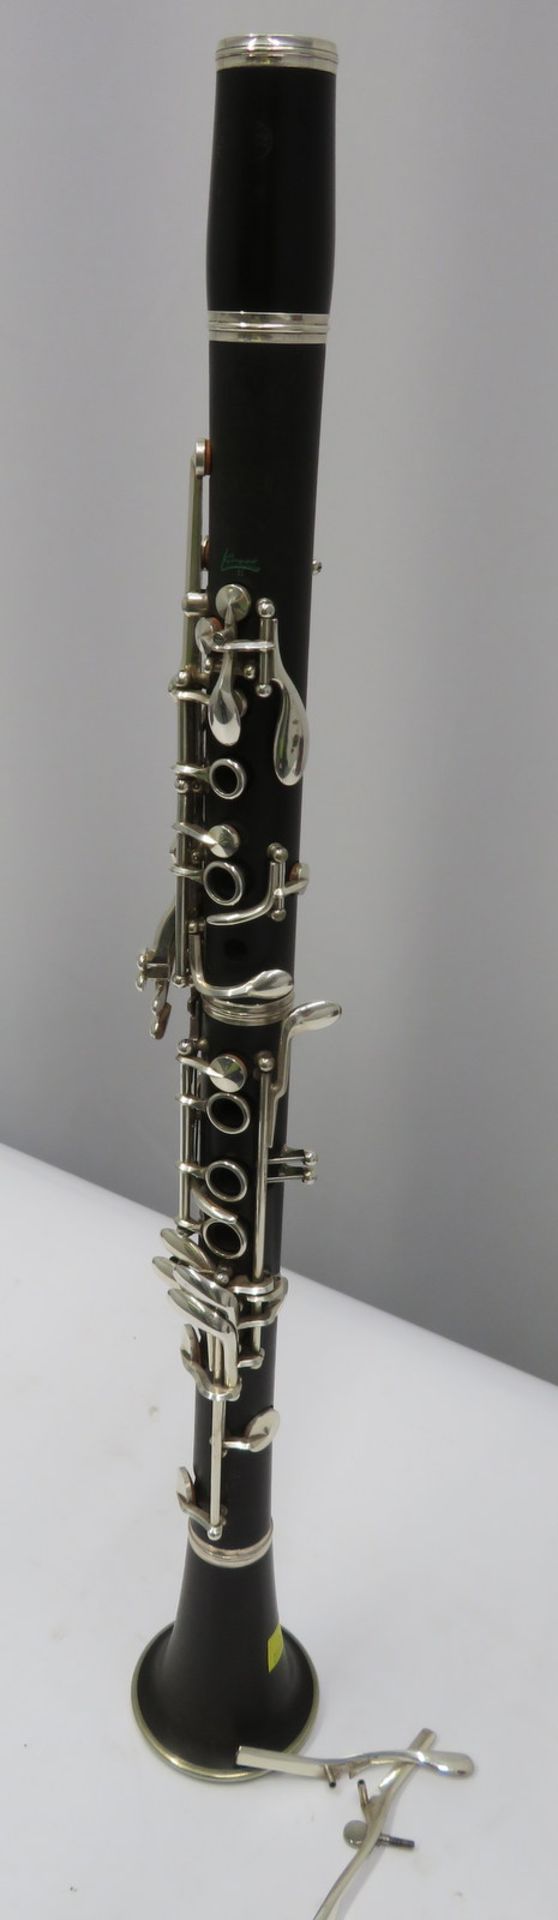 Buffet Crampon L Green clarinet with case. Serial number: 477678. - Image 4 of 19